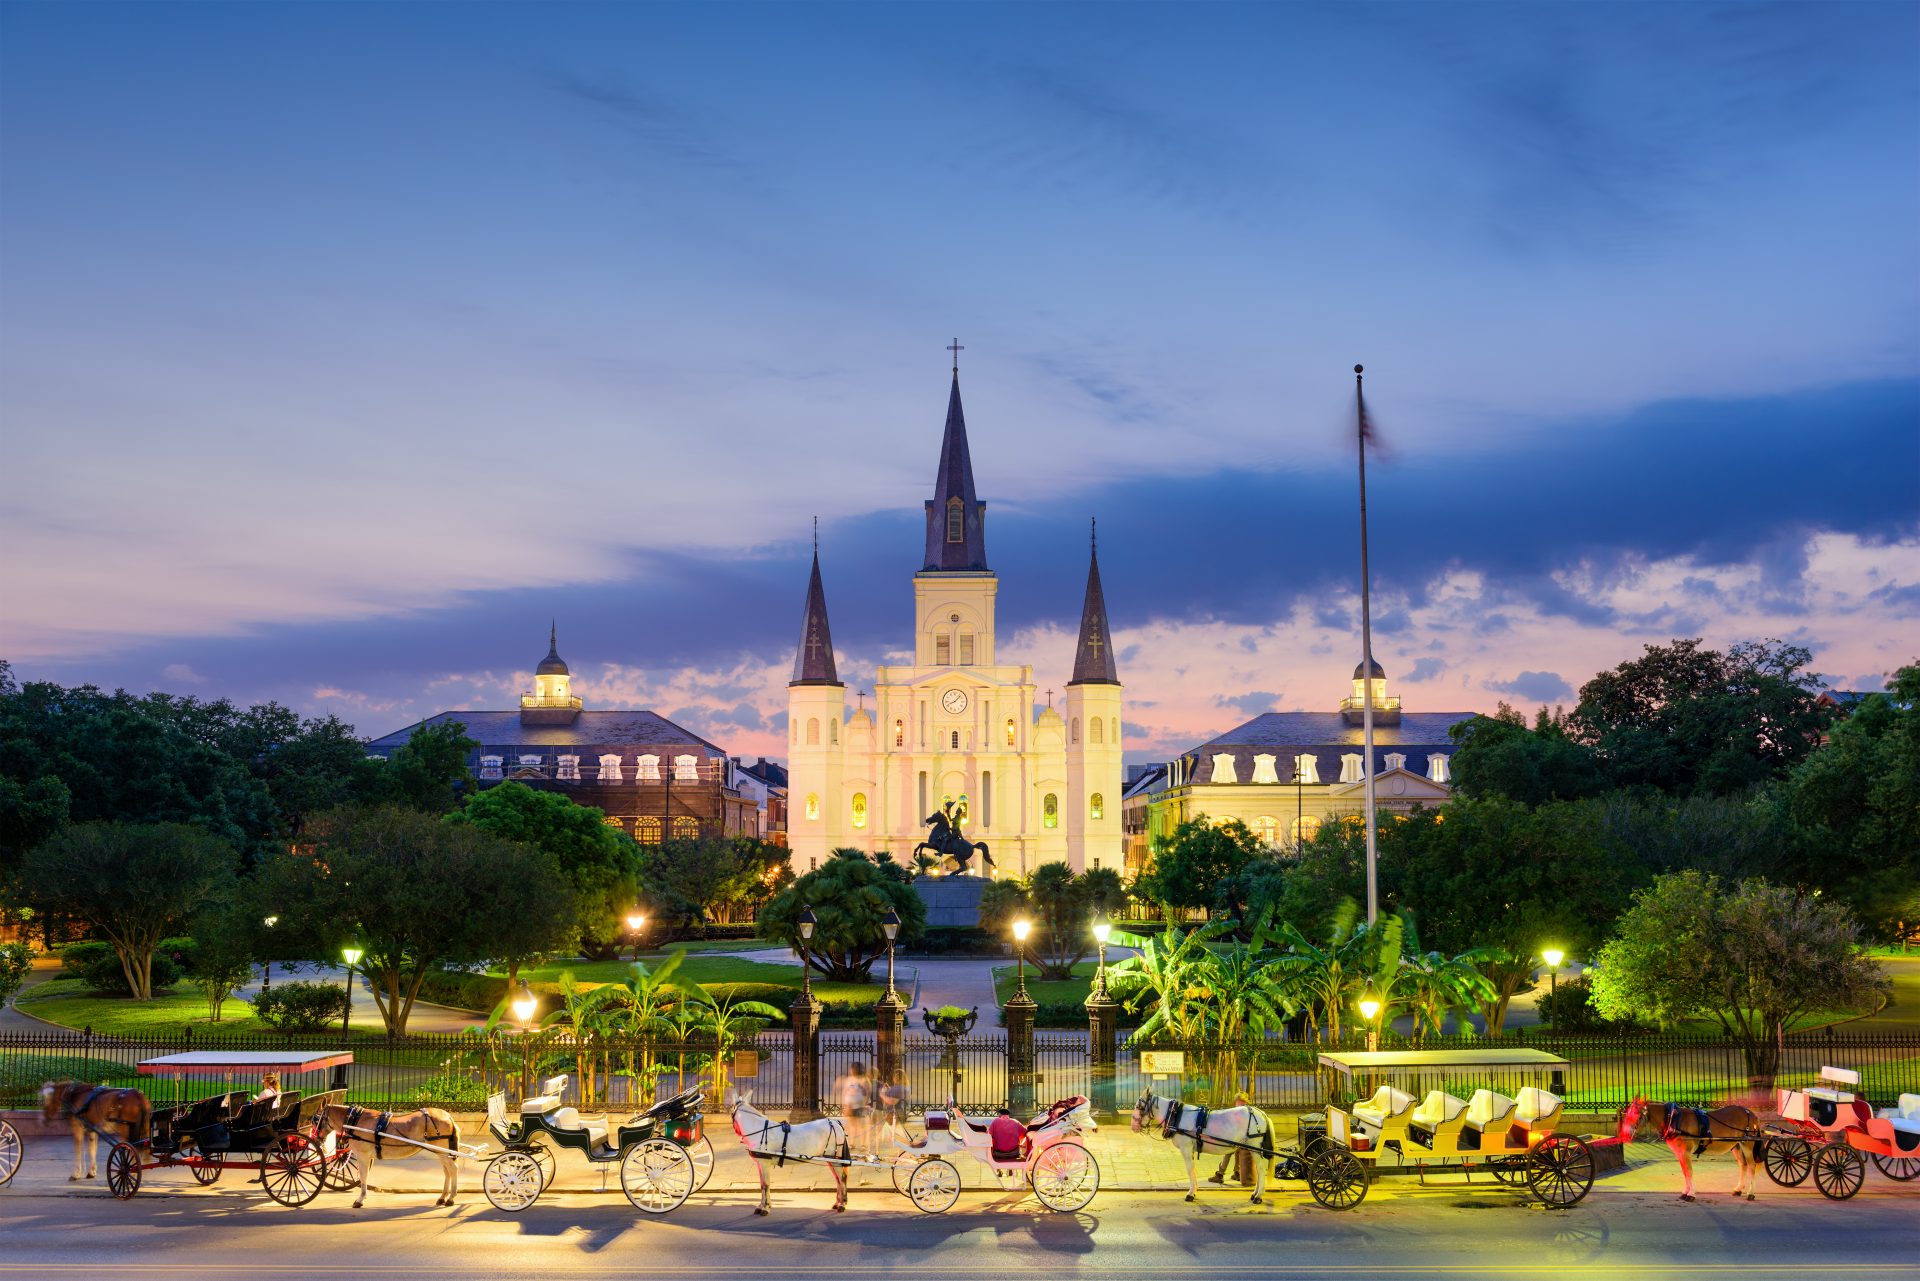 St. Louis Cathedral in the French Quarter in New Orleans